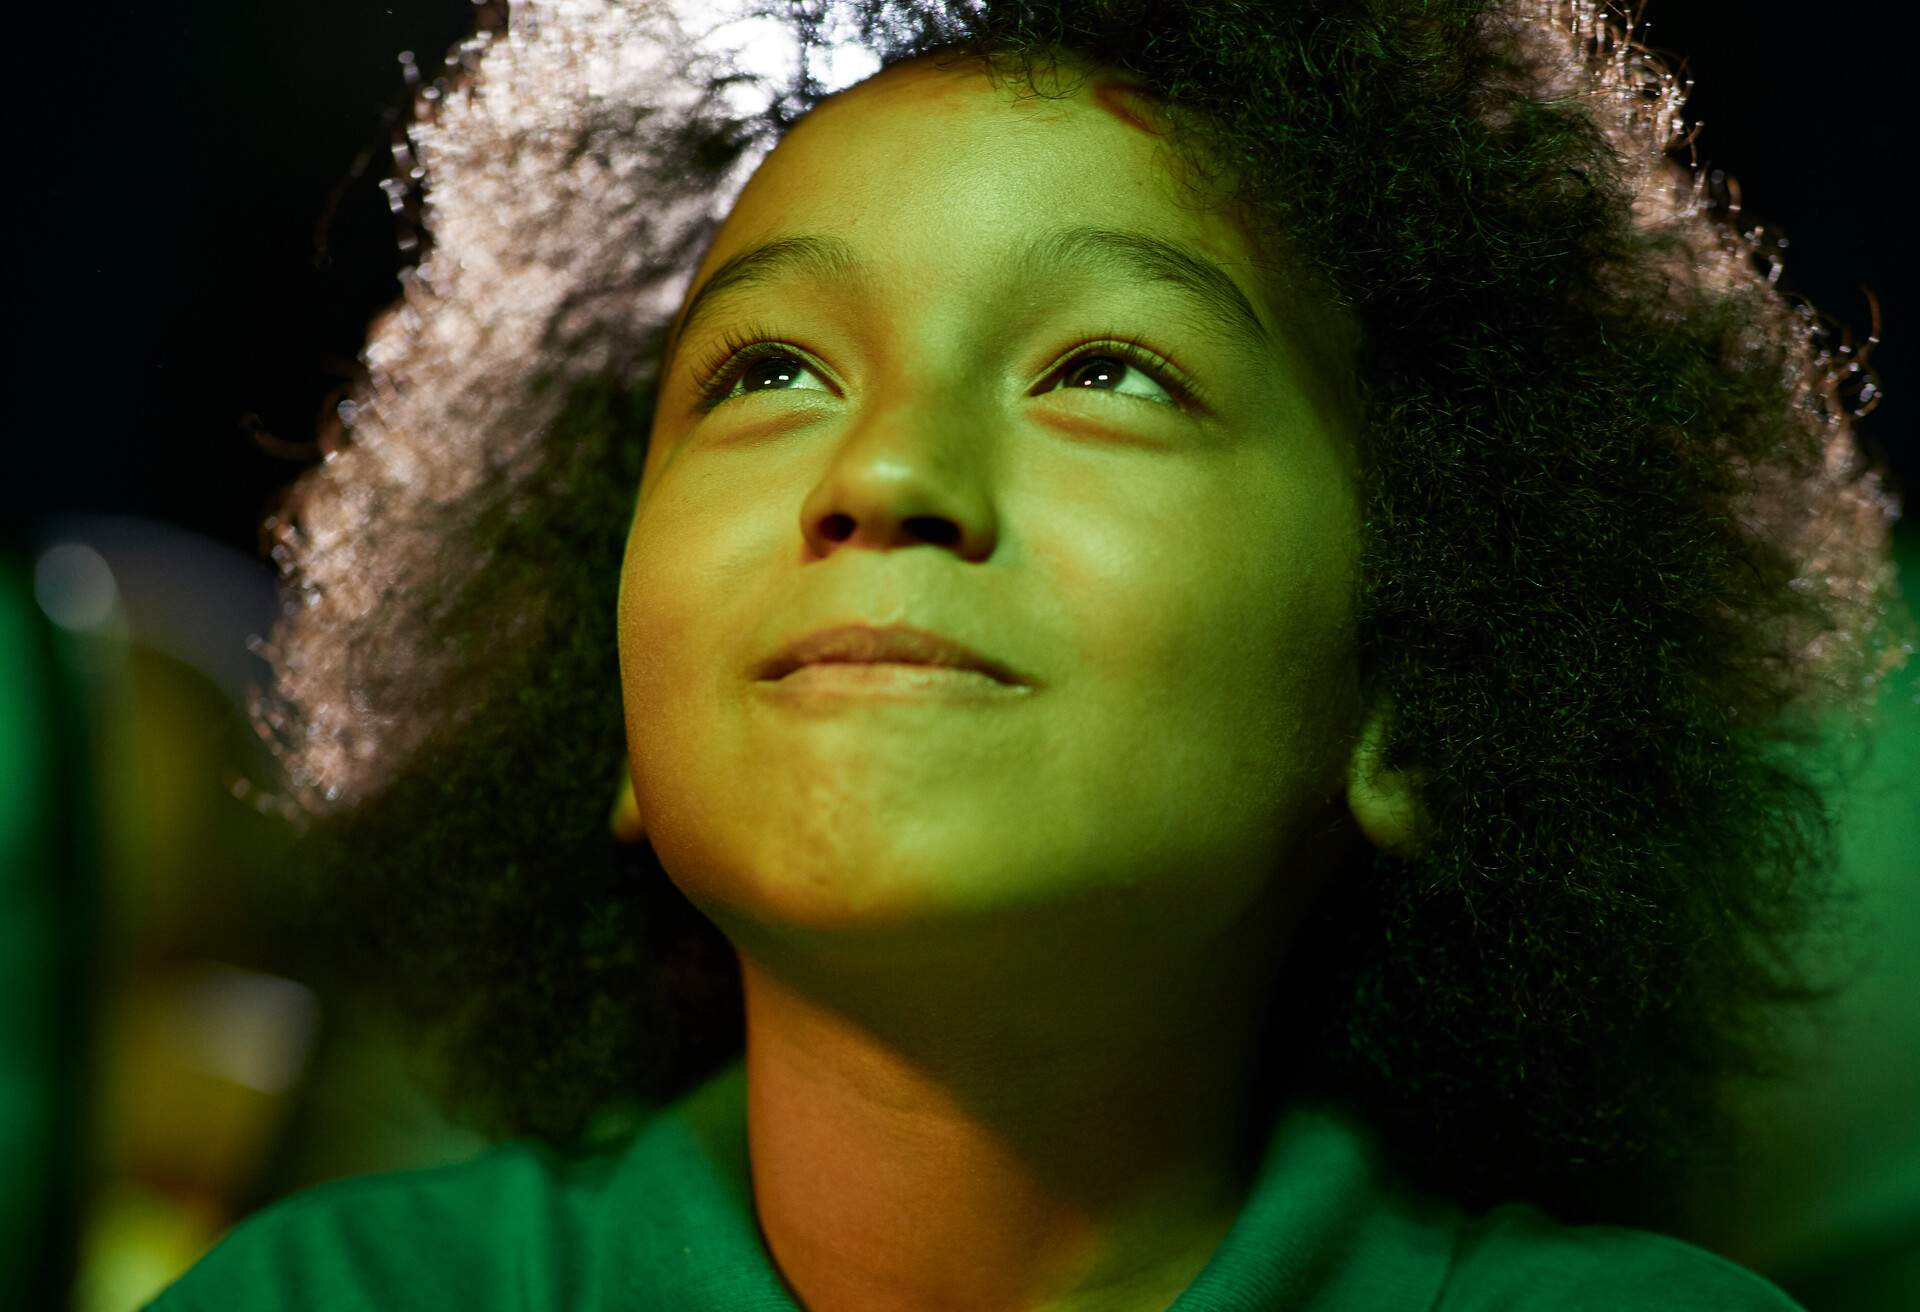 A curious boy with afro hair gazes upwards in wonder, surrounded by the dimly lit ambiance of a theater.